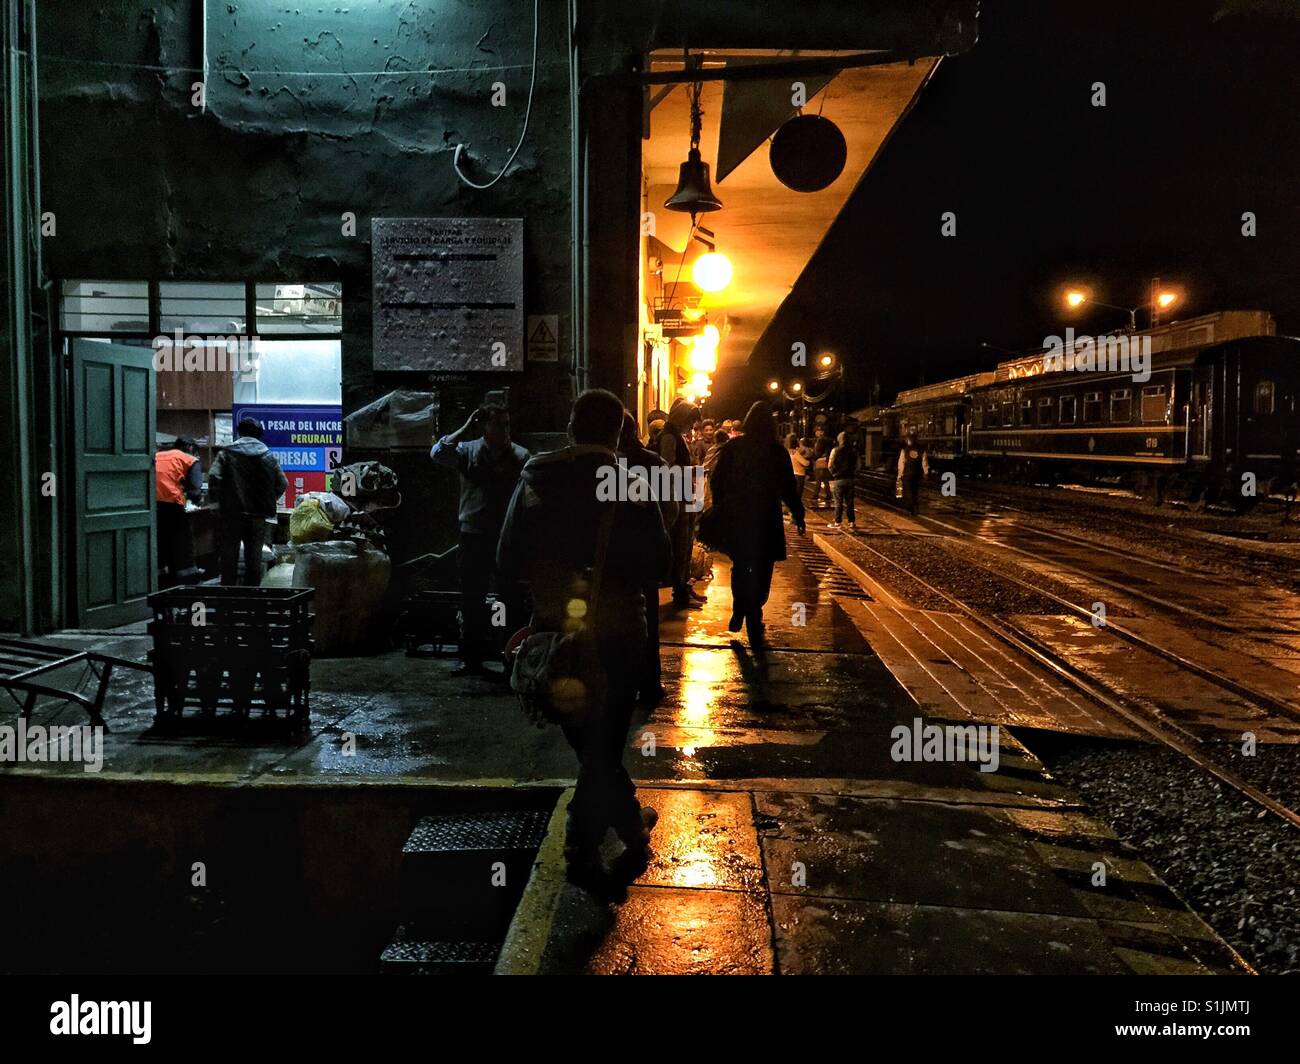 Lights reflect in wet surface of the train station in Ollantaytambo in Peru at night Stock Photo